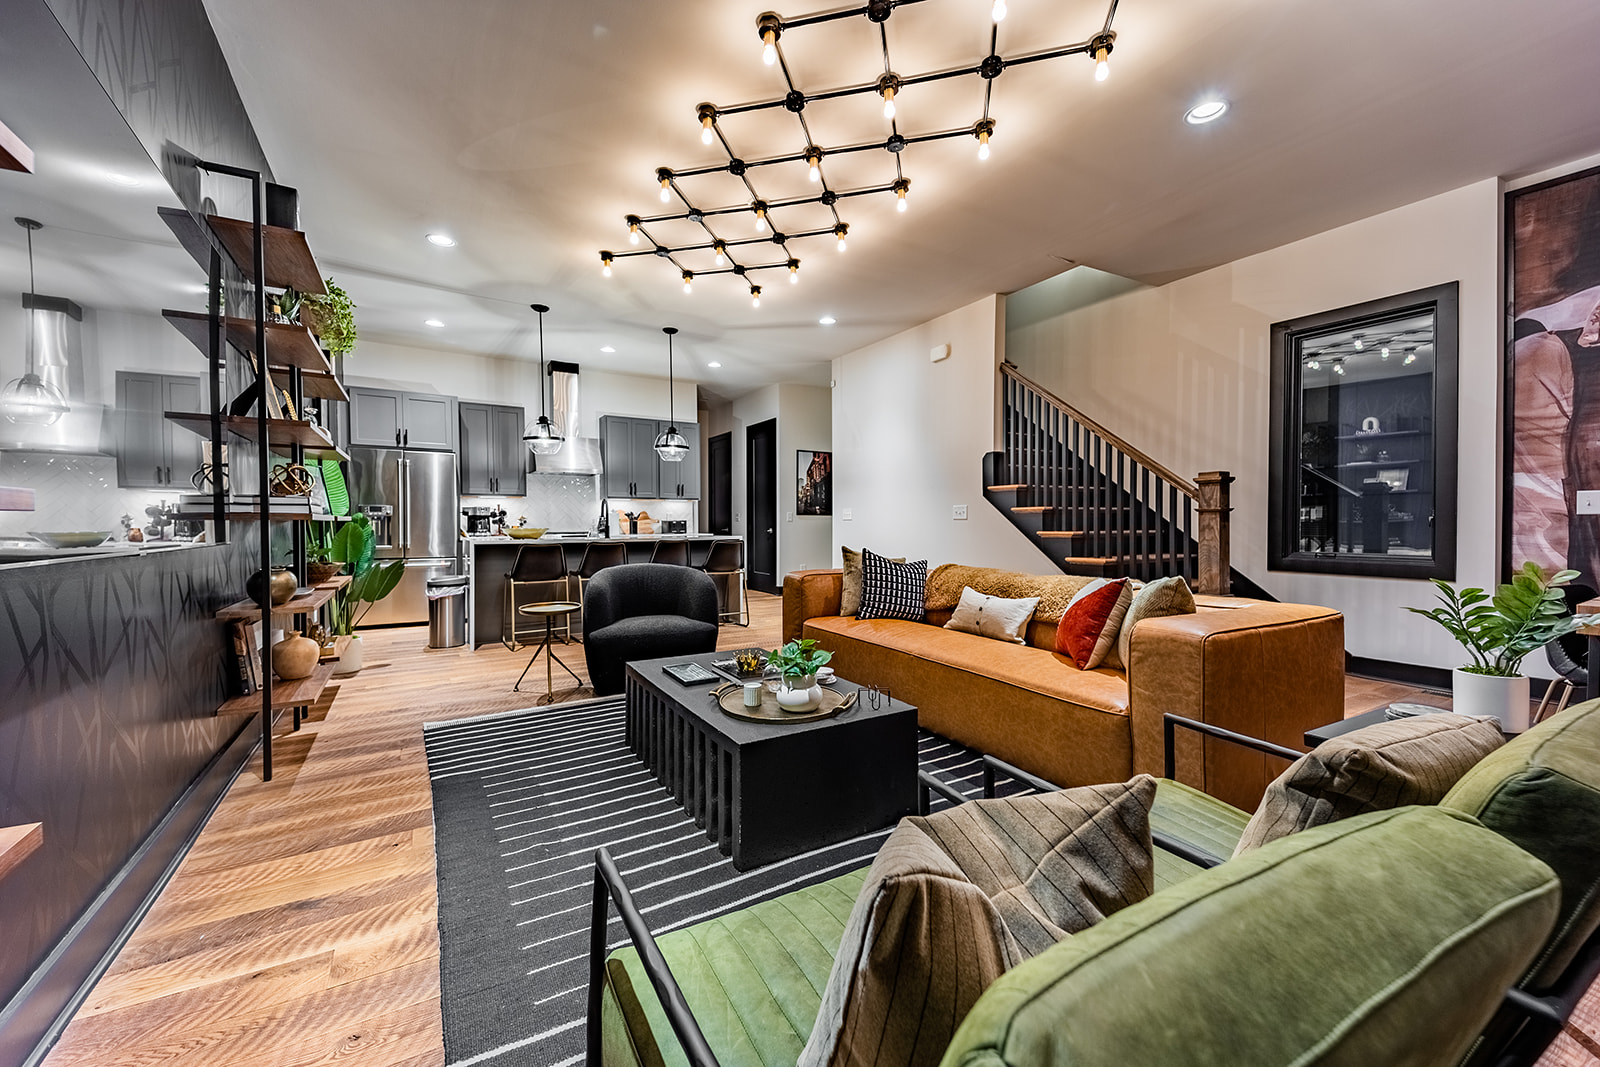 Extremely detailed spacious living area with designer luxury furnishings, 85 in flat screen TV, flooring from a 150 year old barn, custom murals/wall art, light fixtures and wall paper.